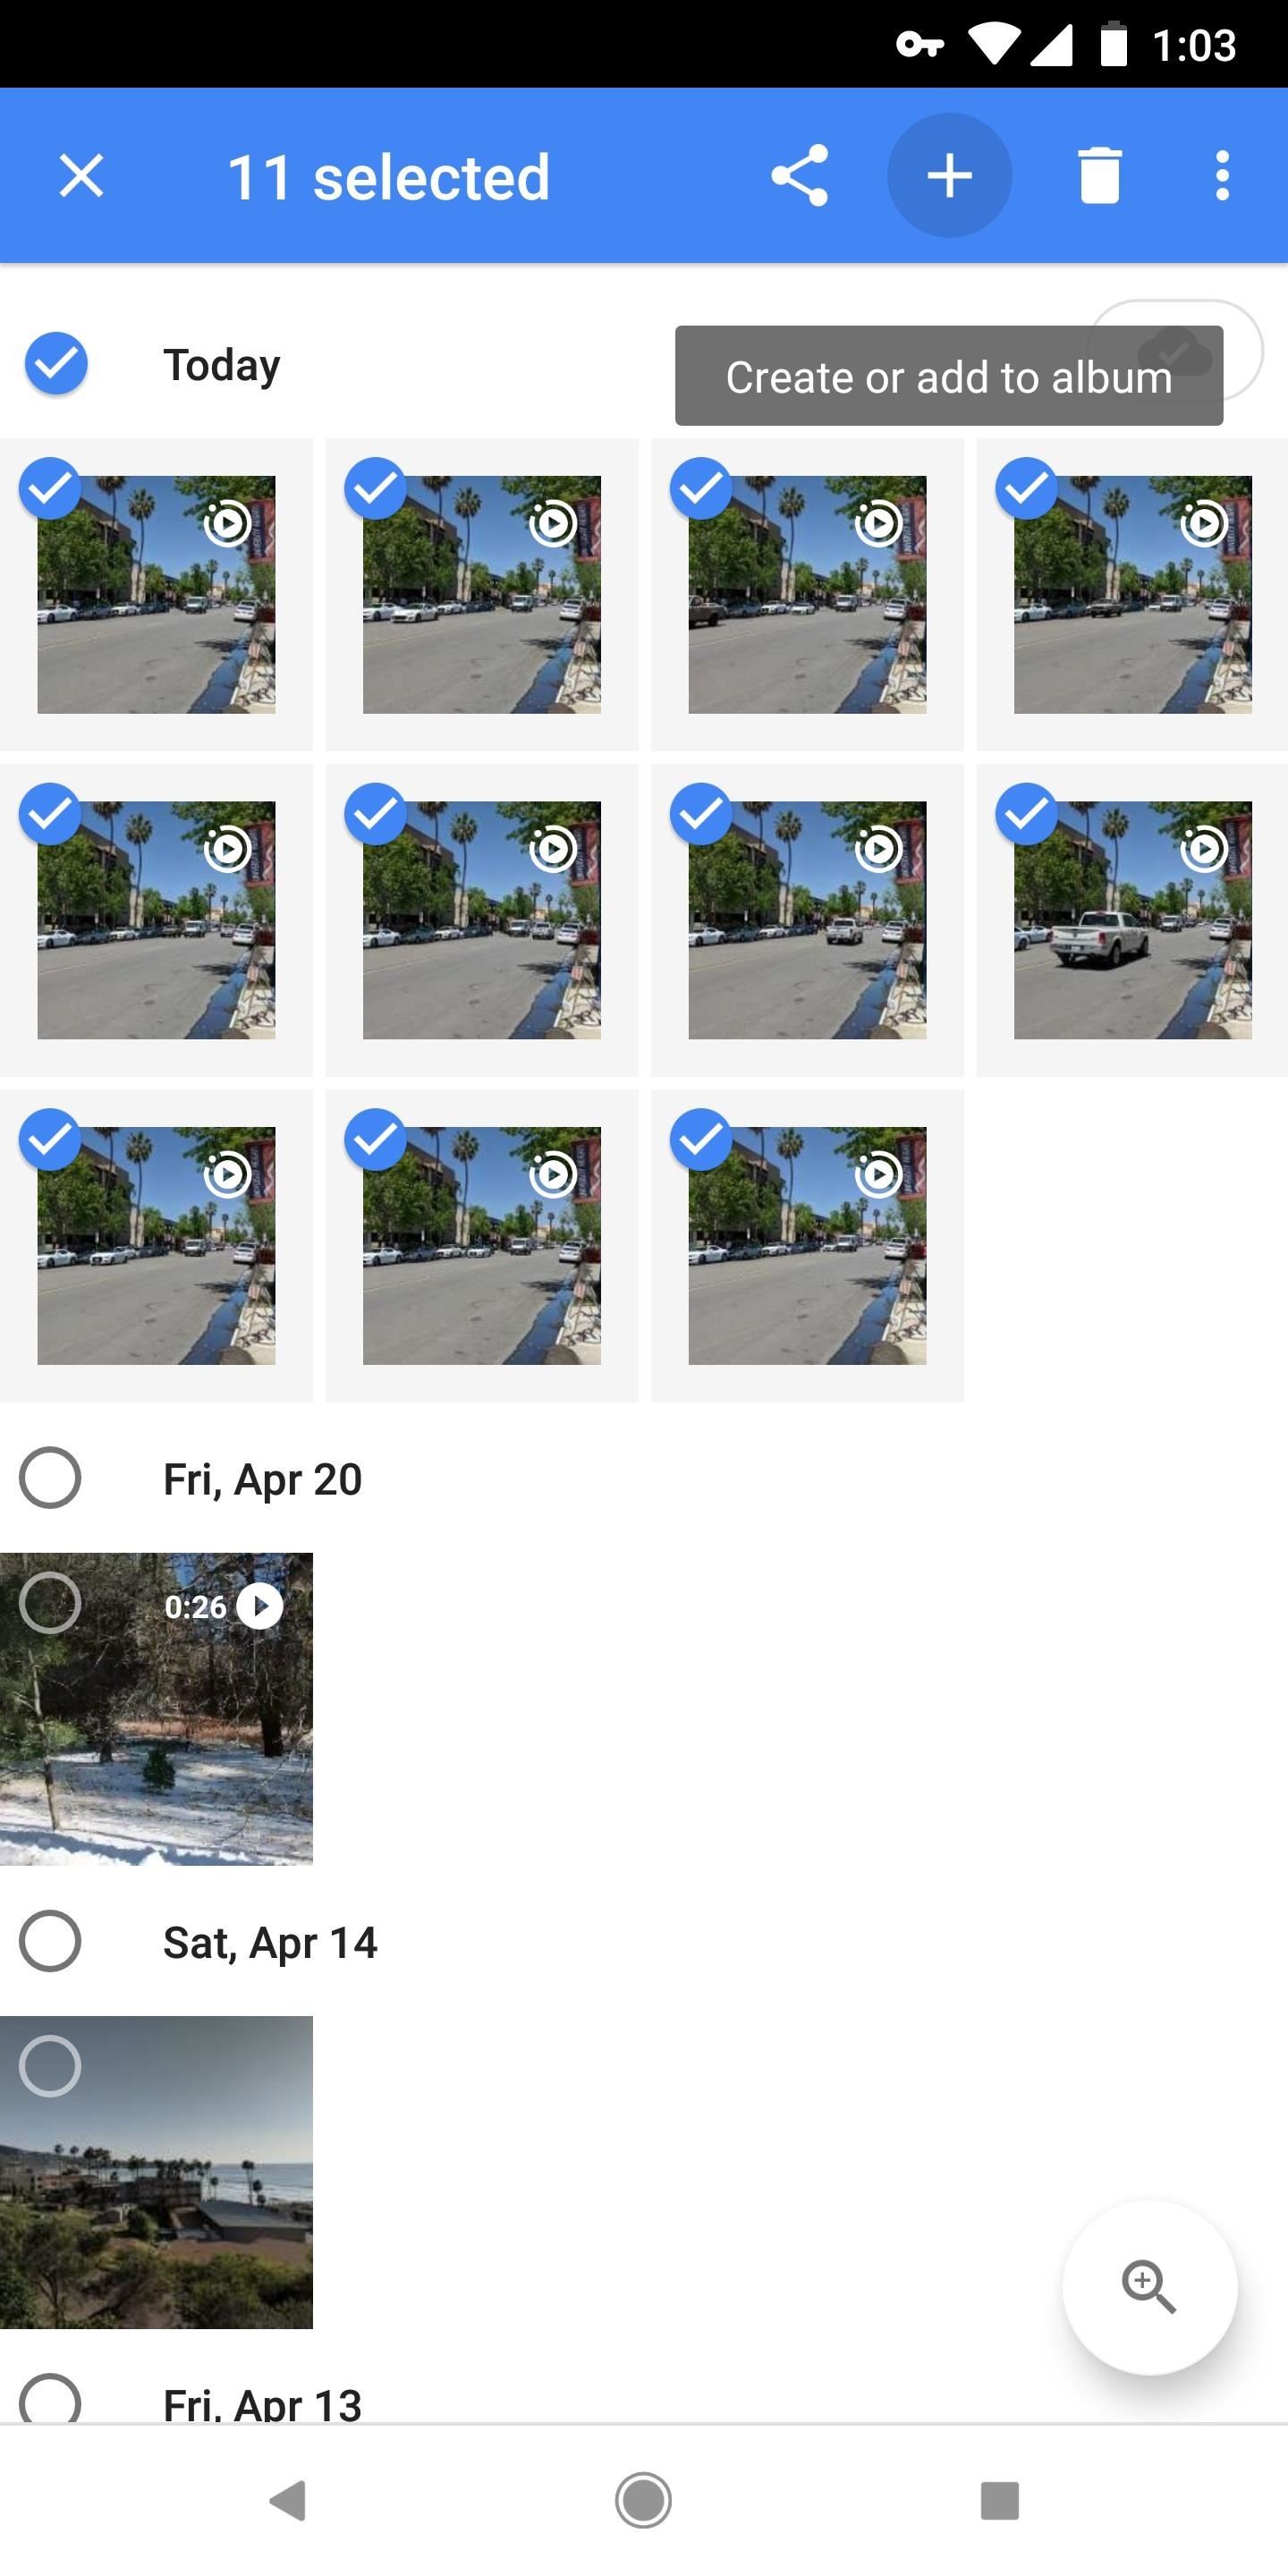 Google Photos 101: How to Make Your Own GIFs Out of Pictures You've Taken